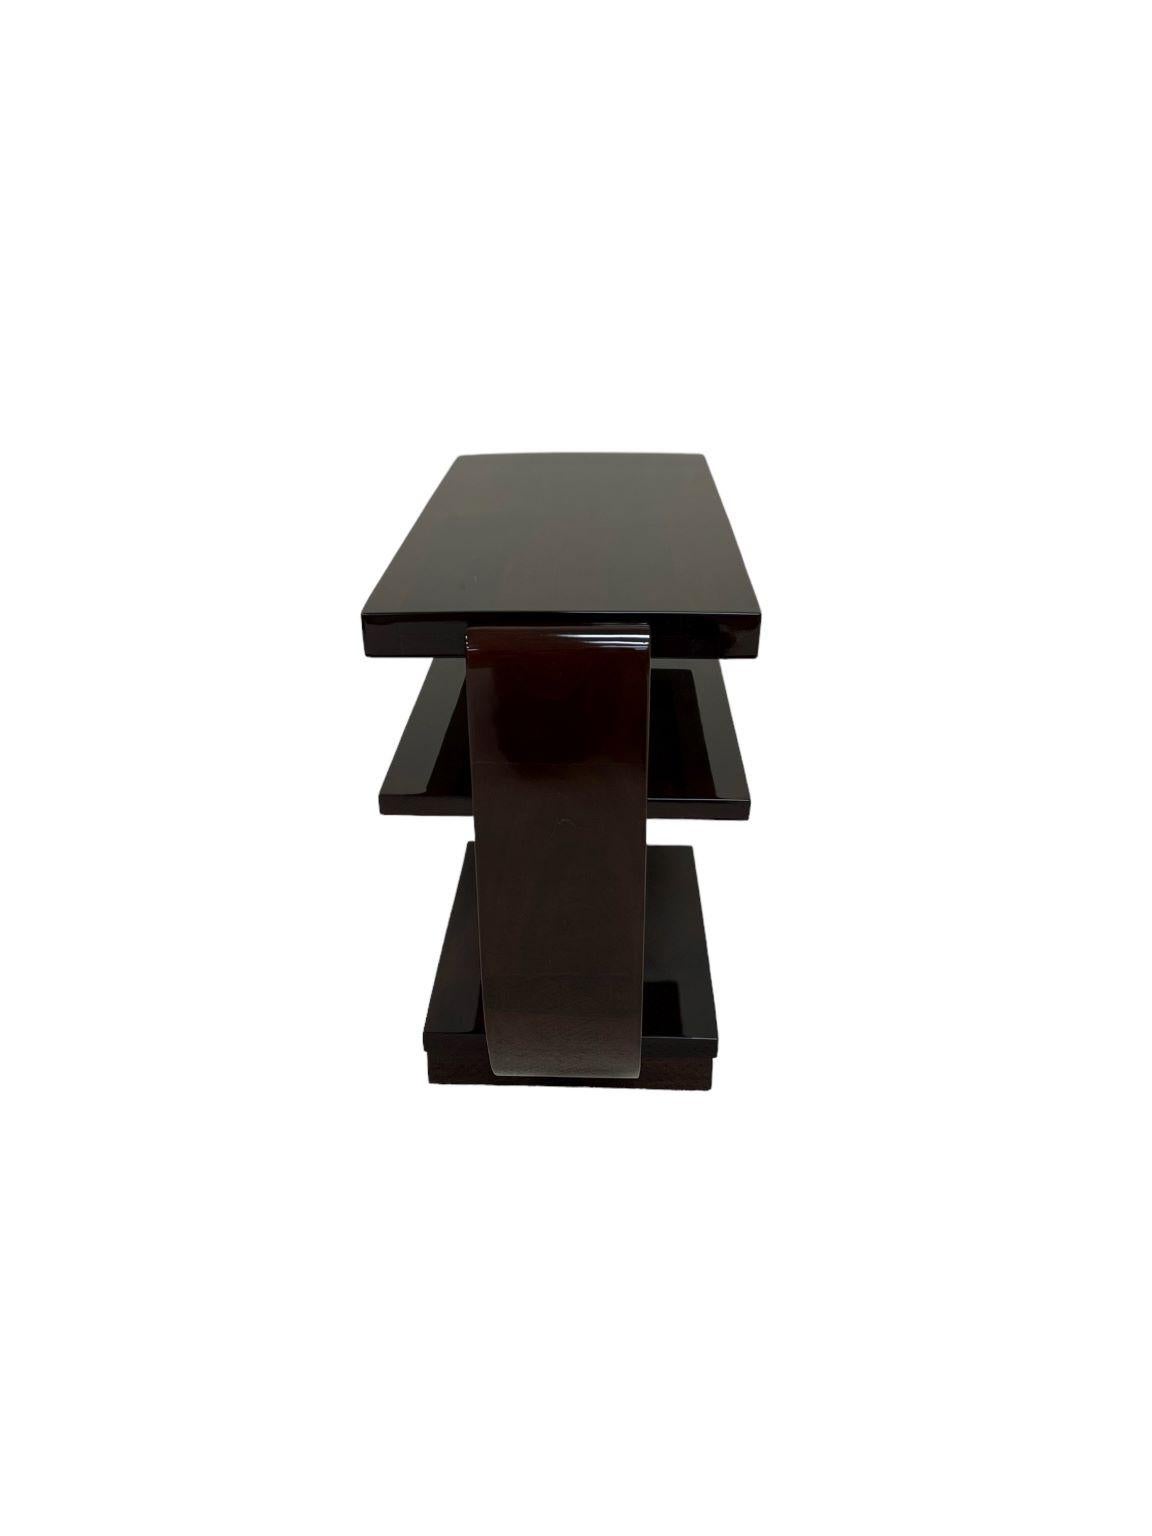 Mid-20th Century American Art Deco Side Table by Modernage Furniture Company Circa 1930's For Sale